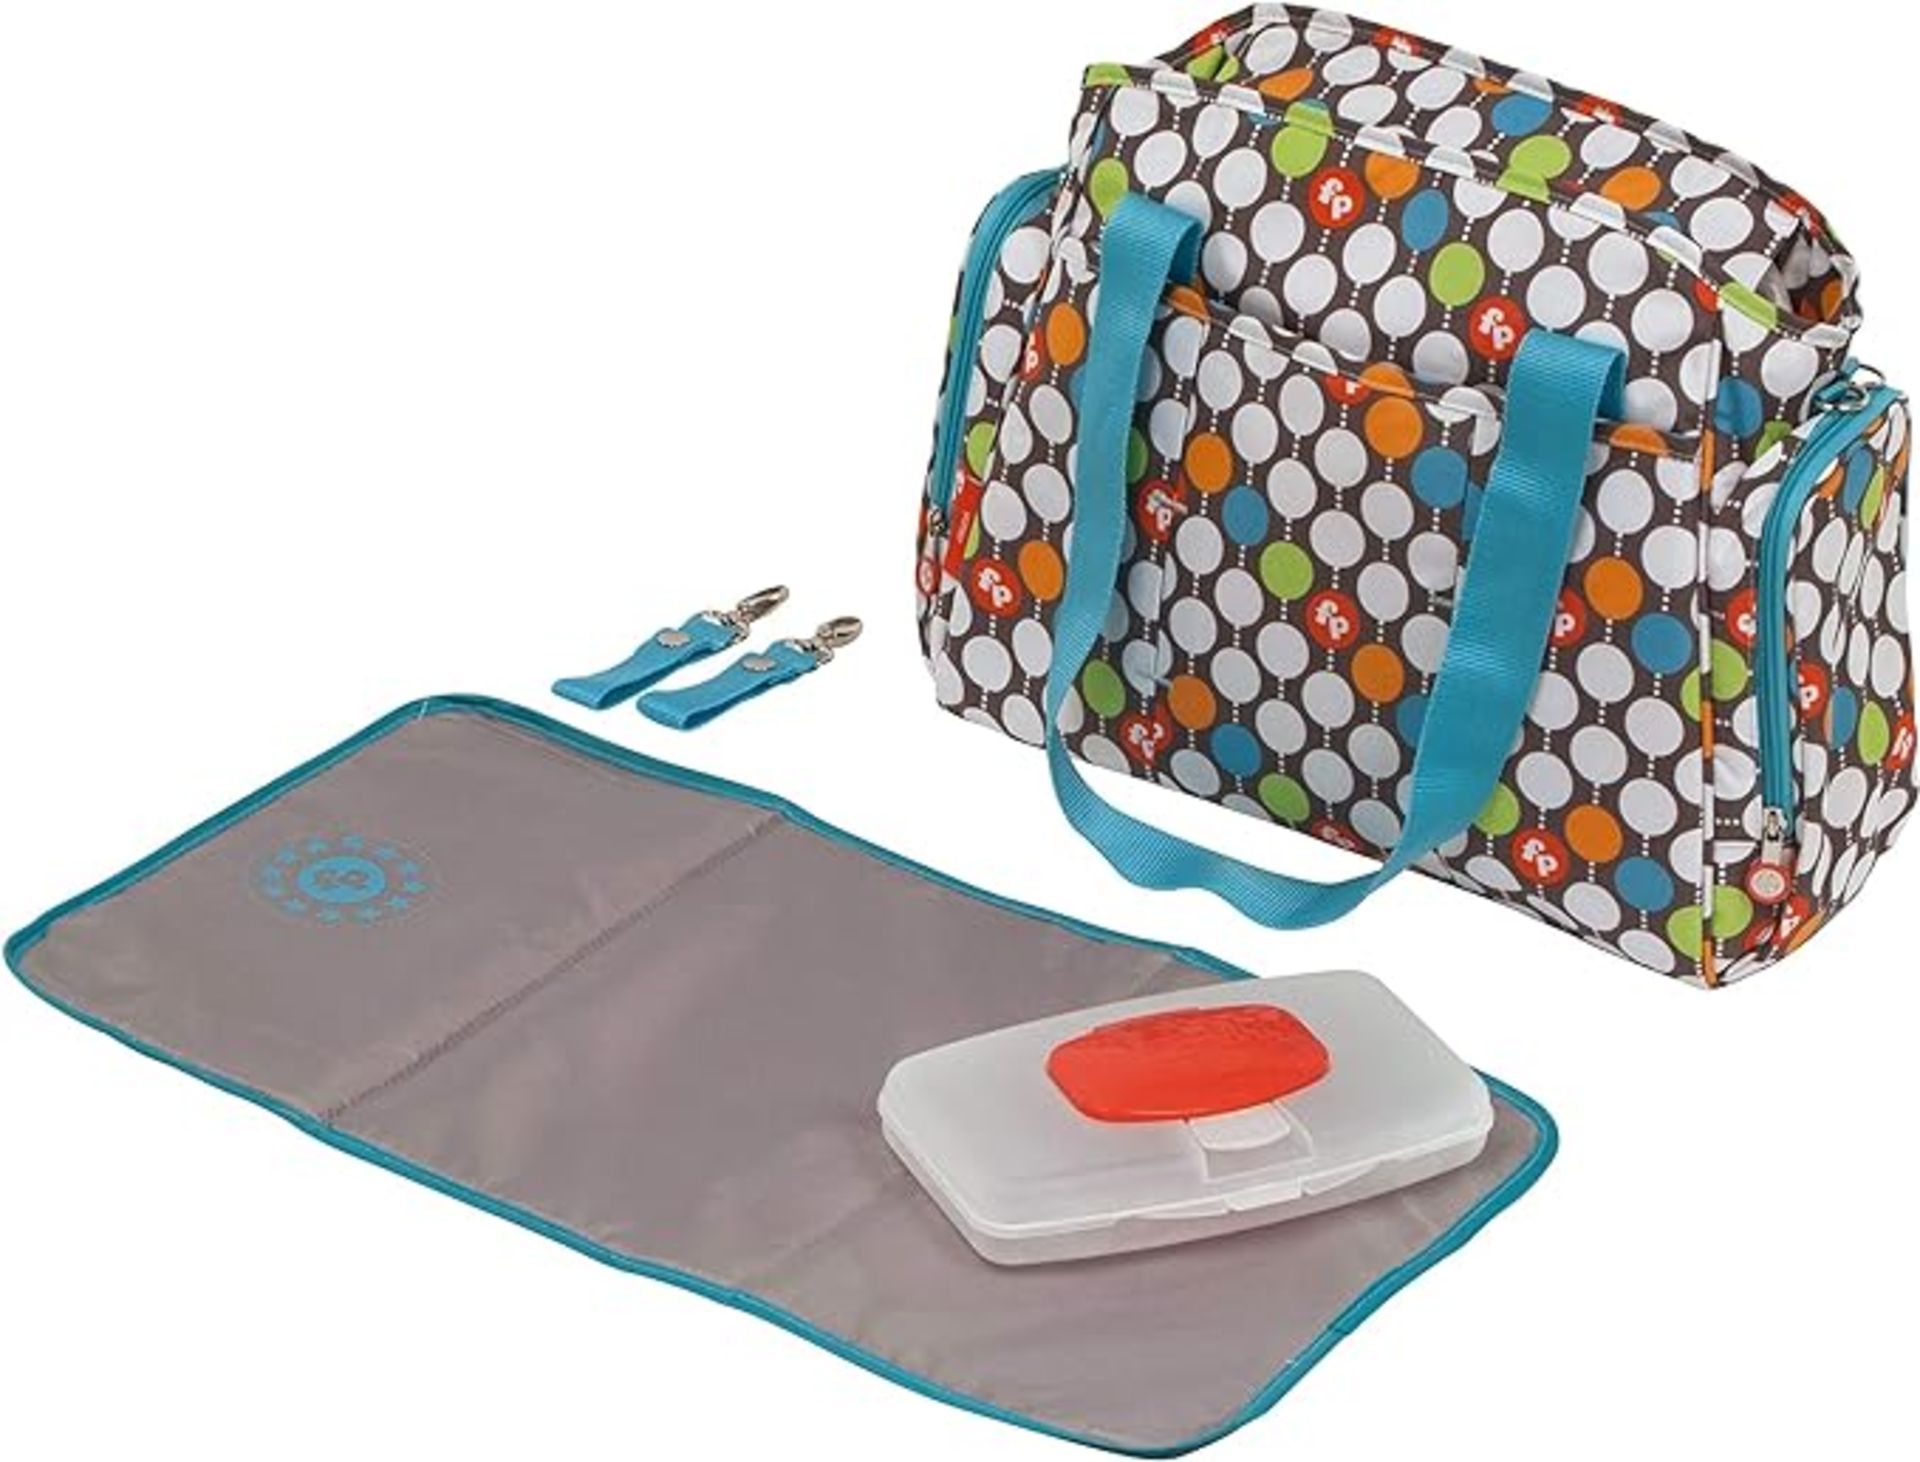 10 X NEW FISHER PRICE BABY BAG+ACC 37X17X32.5 DOTS - Image 5 of 6